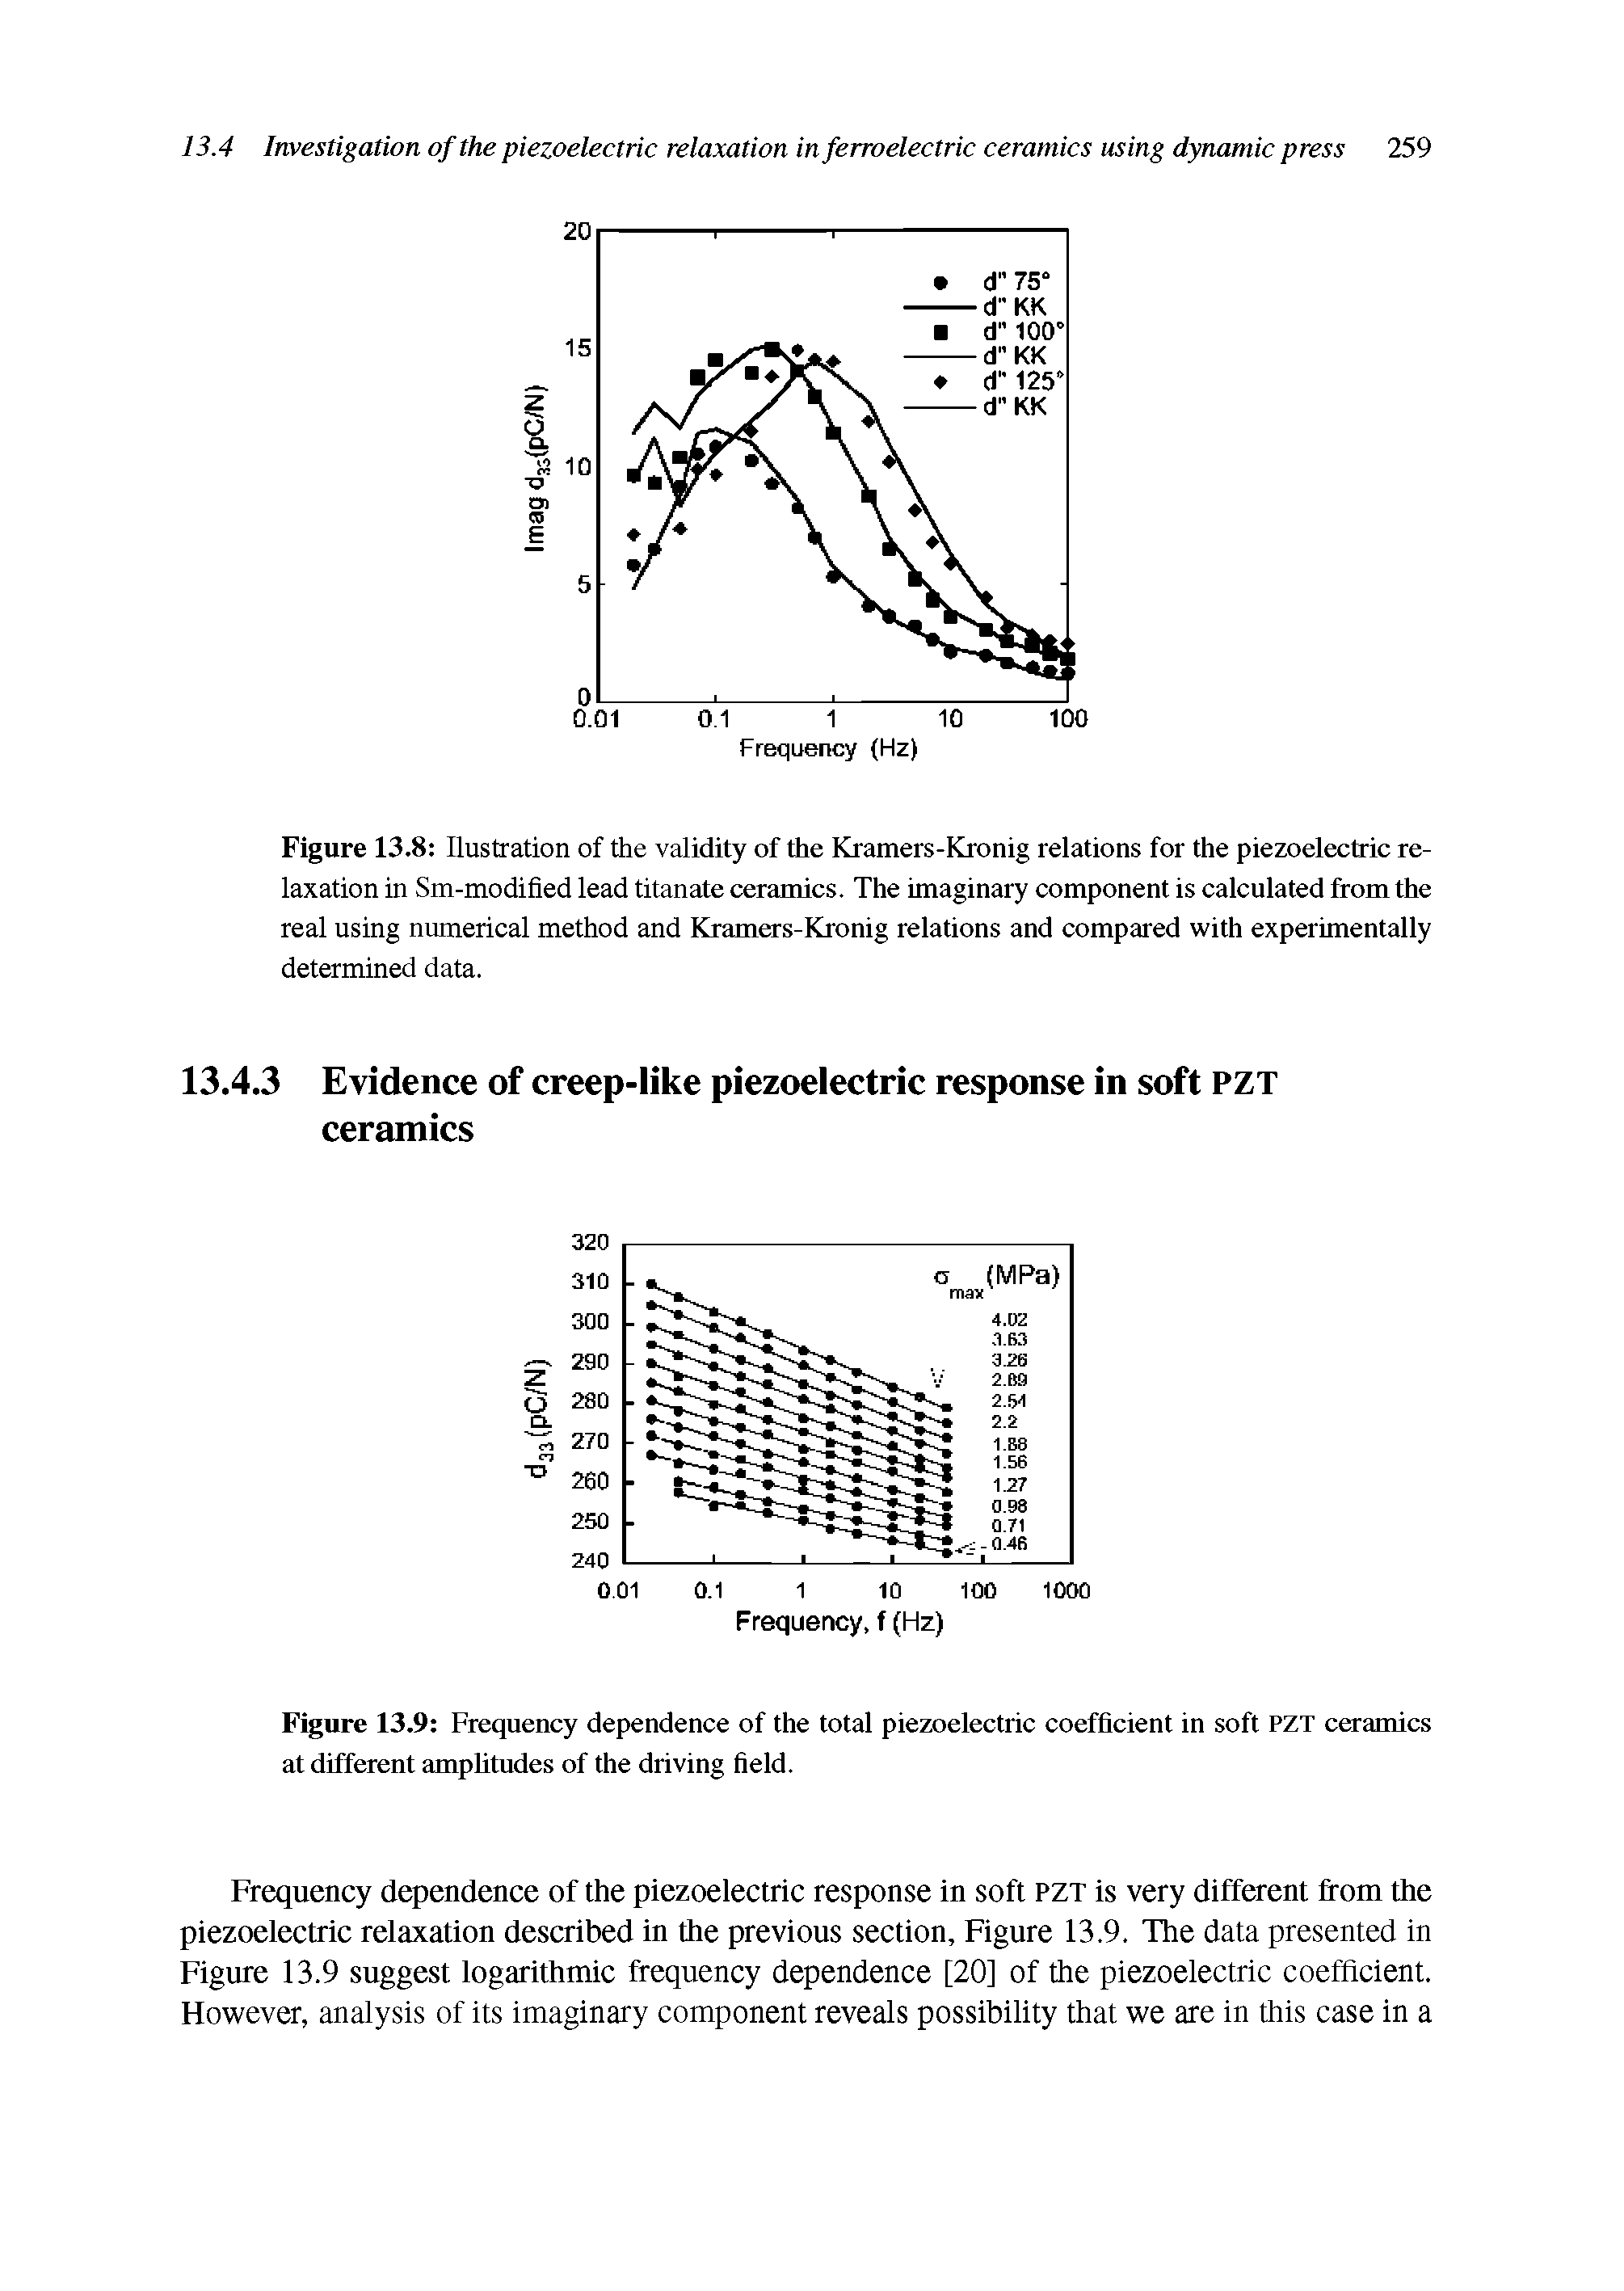 Figure 13.8 Ilustration of the validity of the Kramers-Kronig relations for the piezoelectric relaxation in Sm-modified lead titanate ceramics. The imaginary component is calculated from the real using numerical method and Kramers-Kronig relations and compared with experimentally determined data.